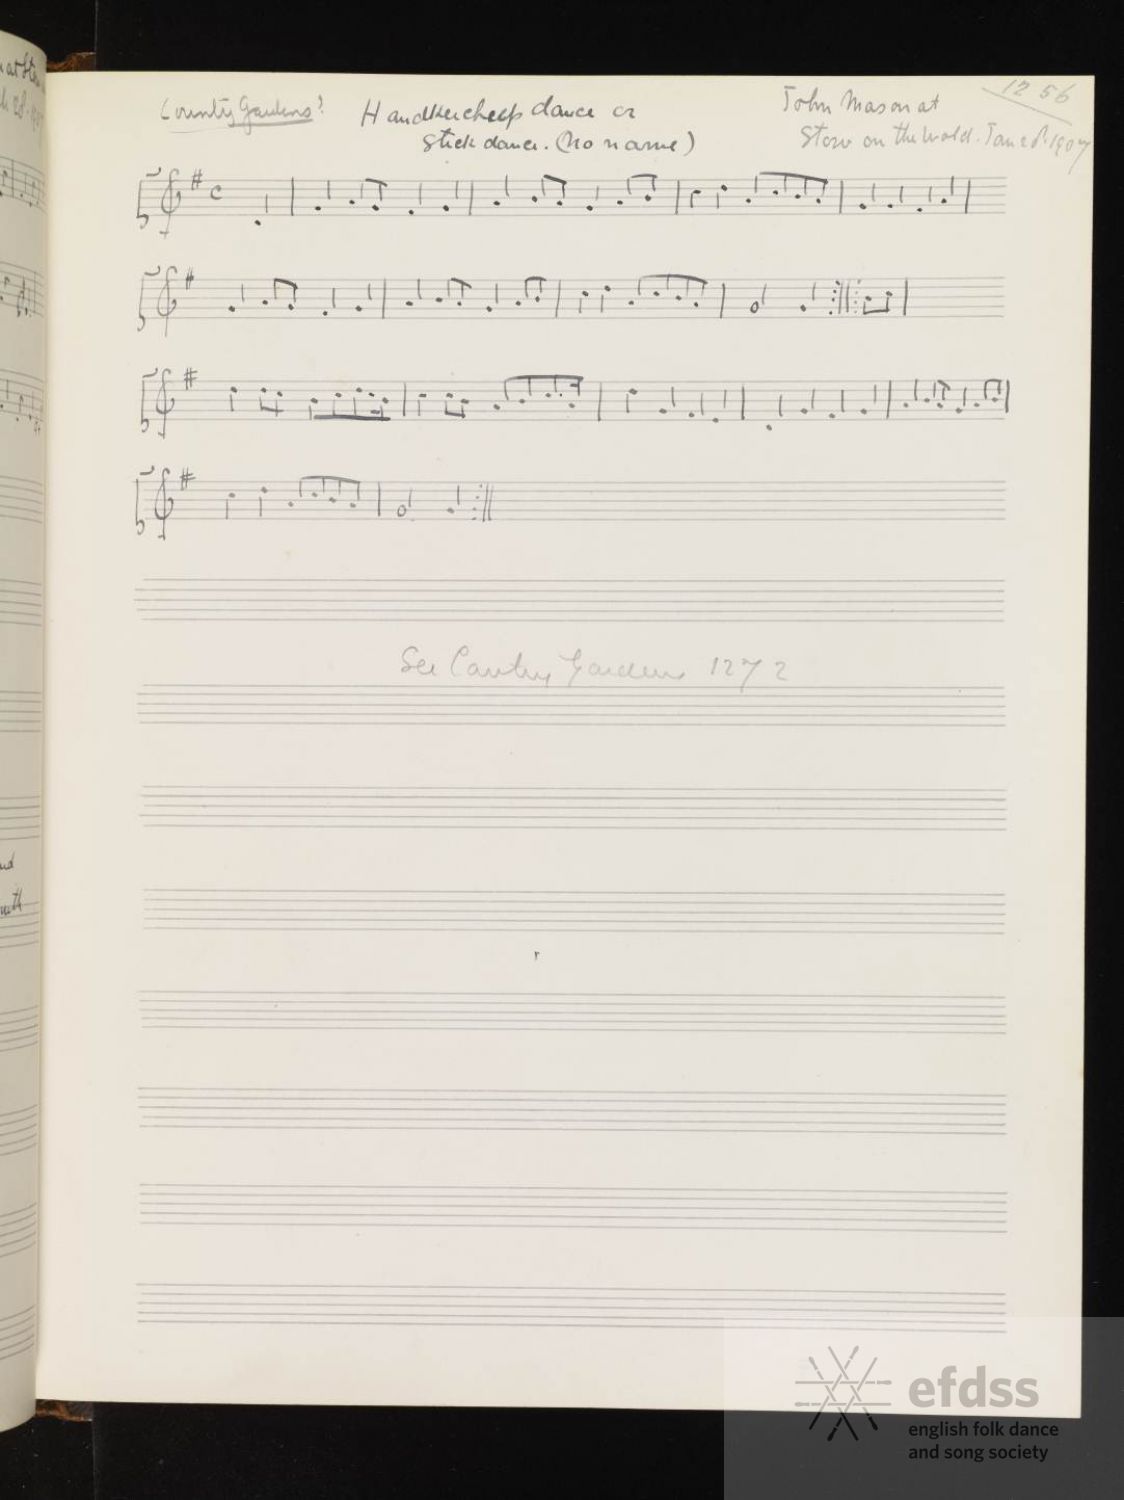 Untitled tune collected from John Mason, 1907.